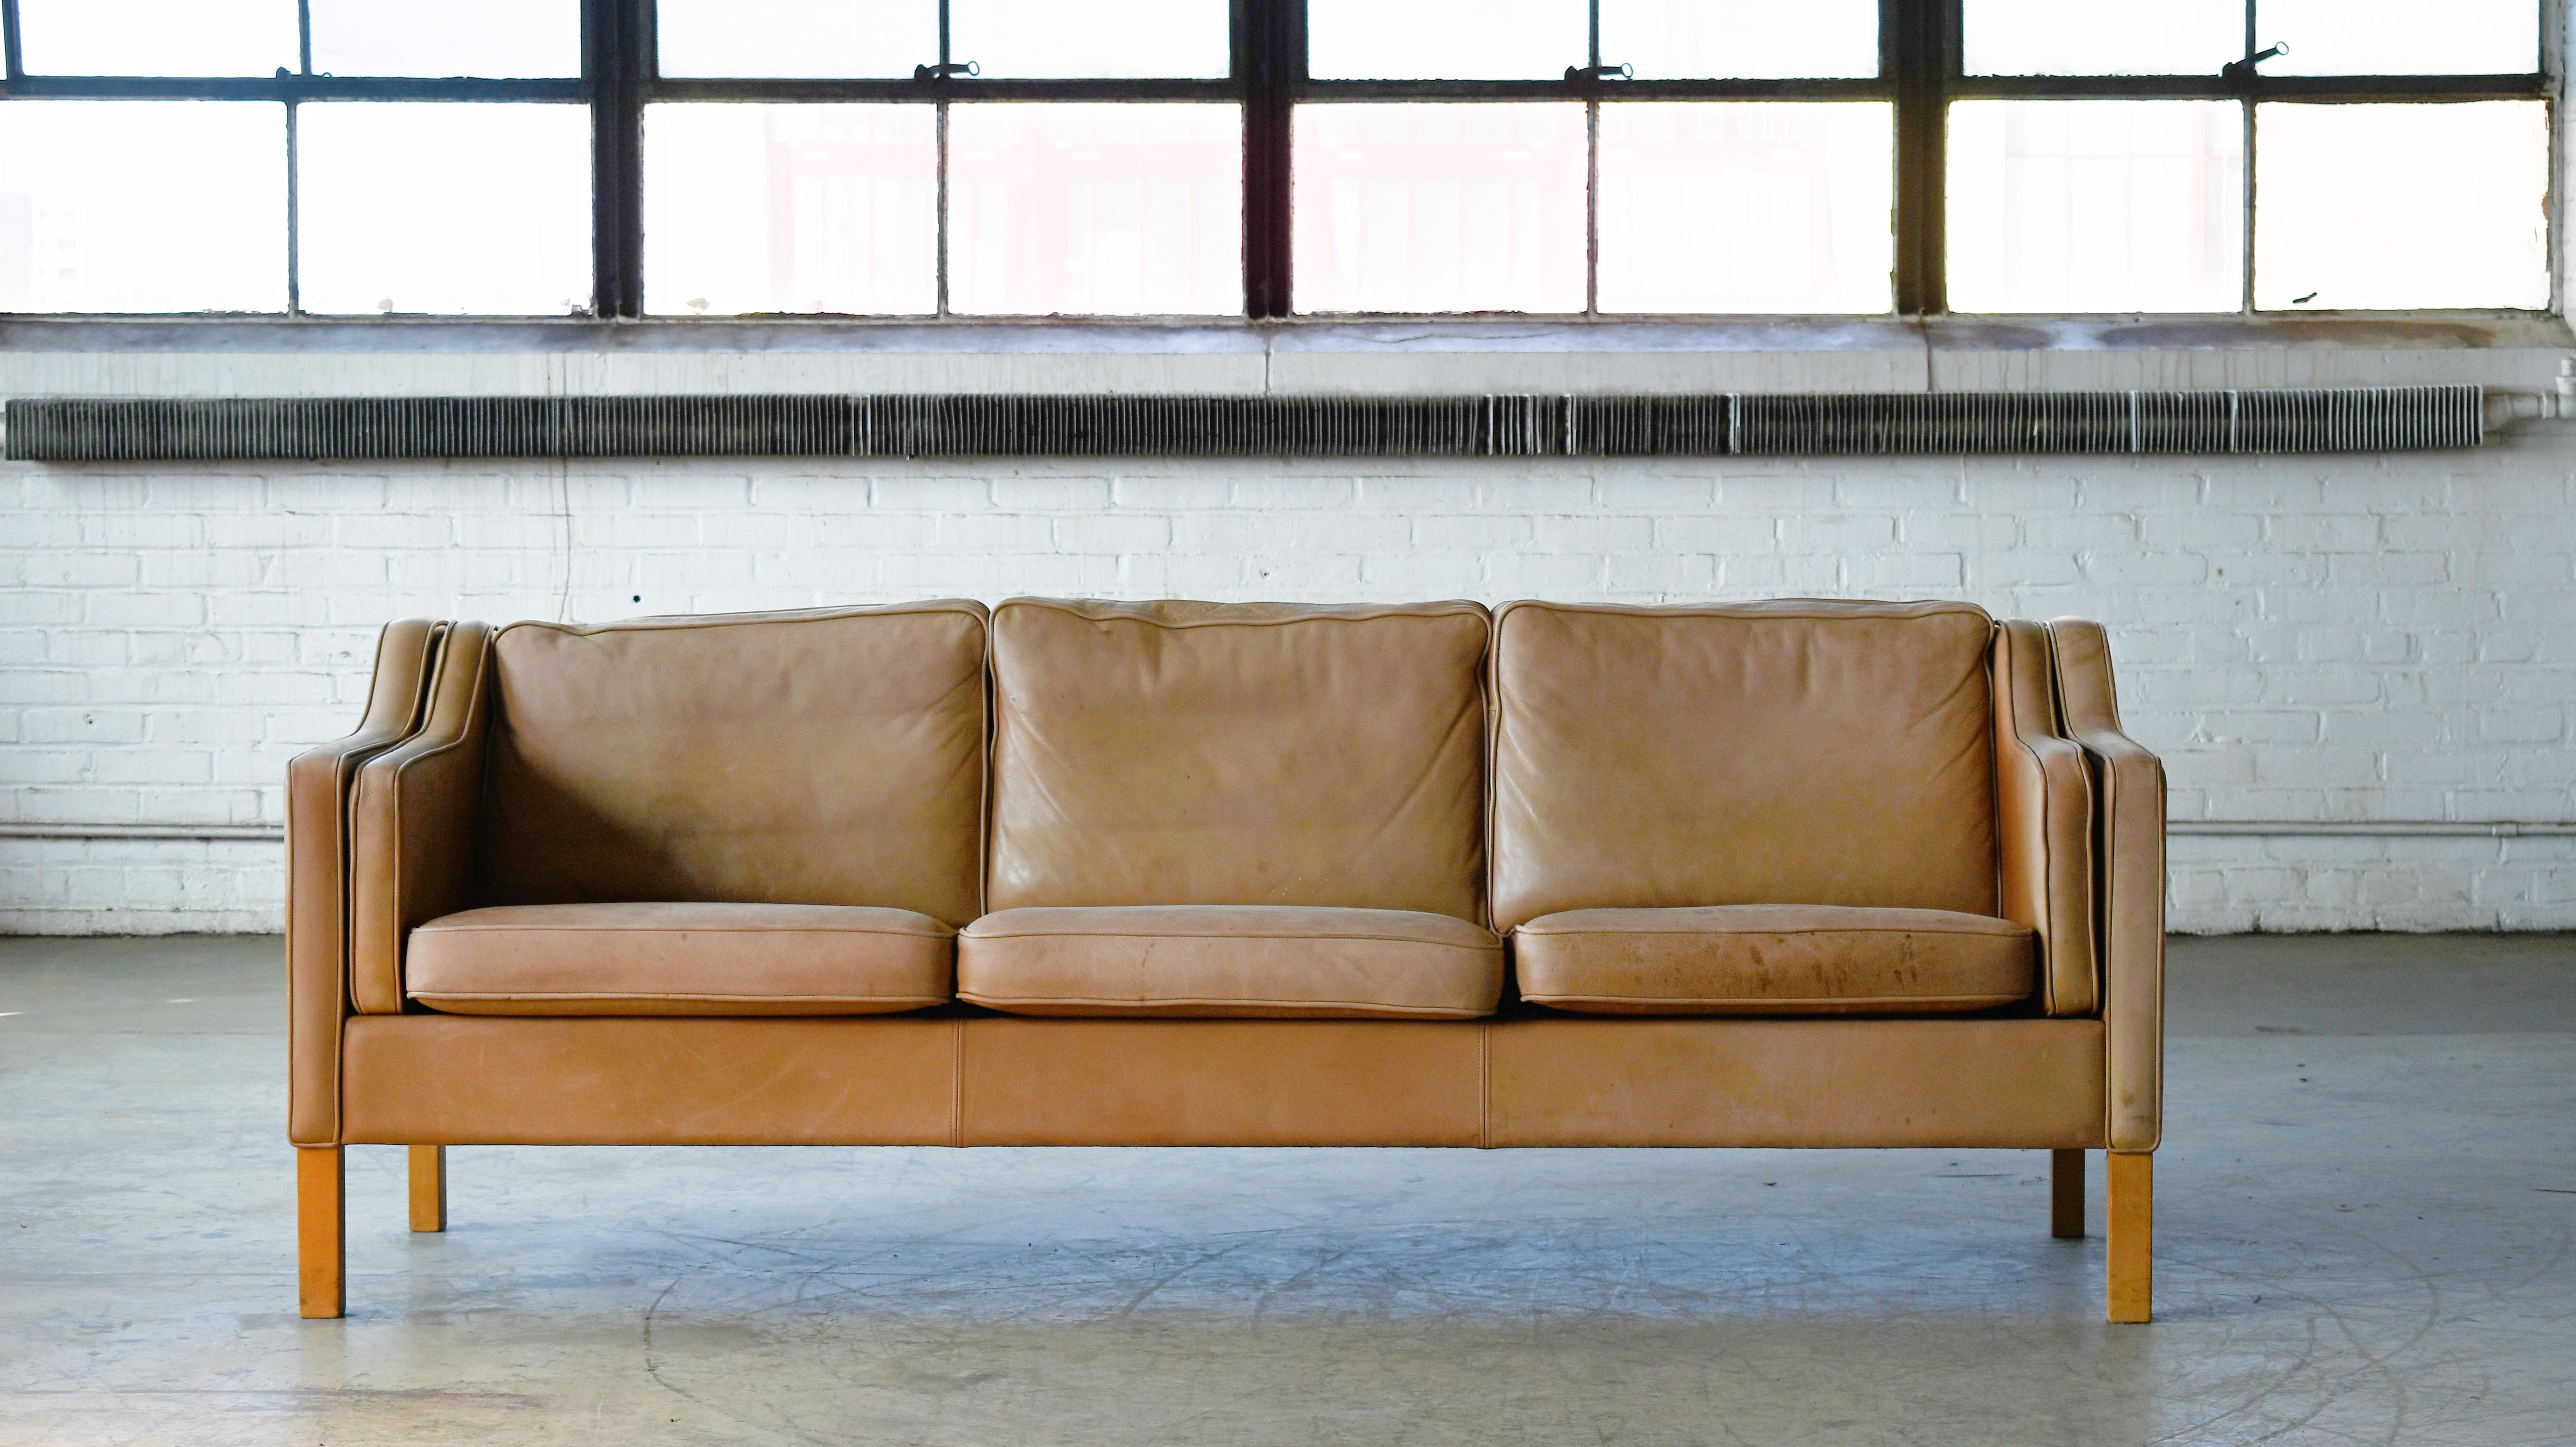 Classic Borge Mogensen style three-seat sofa in cognac leather by Stouby Mobler, Denmark. Cream or beige colored leather raised on legs of beech. High quality craftsmanship and overall very good condition showing some almost perfect natural age wear